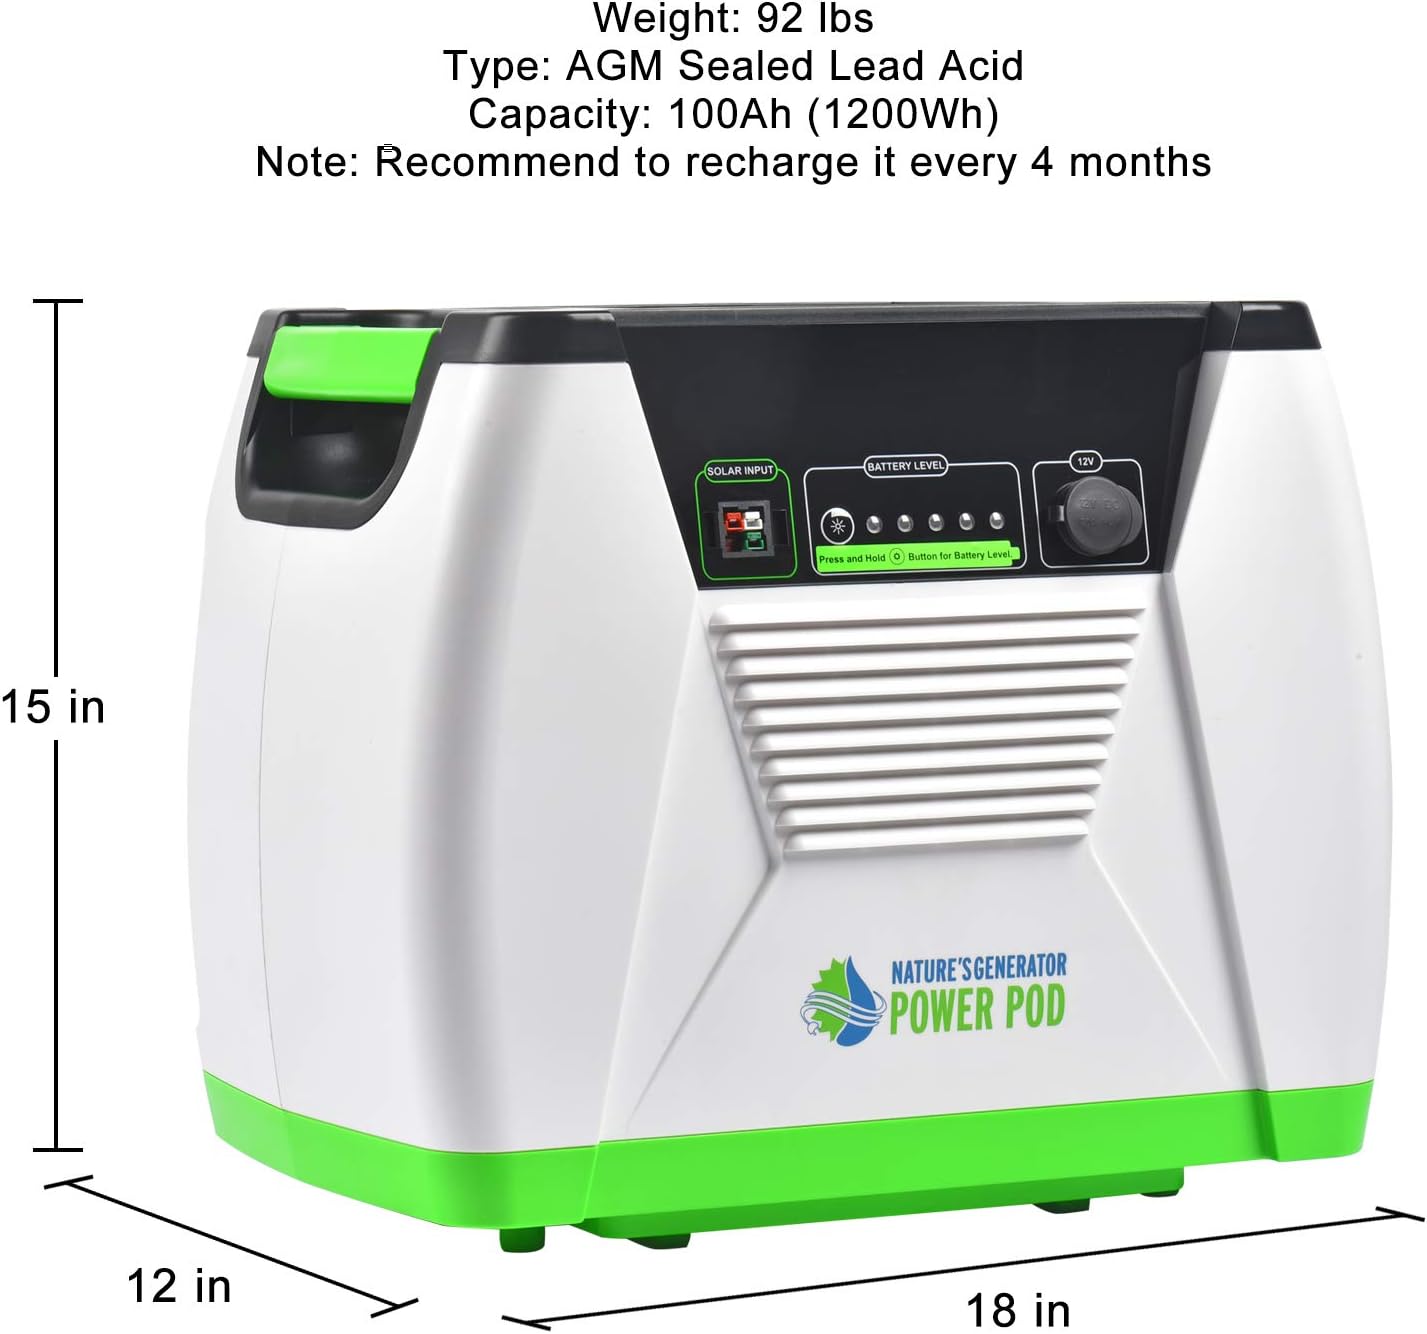 Nature’s Generator Power Pod Adds an additional 100Ah